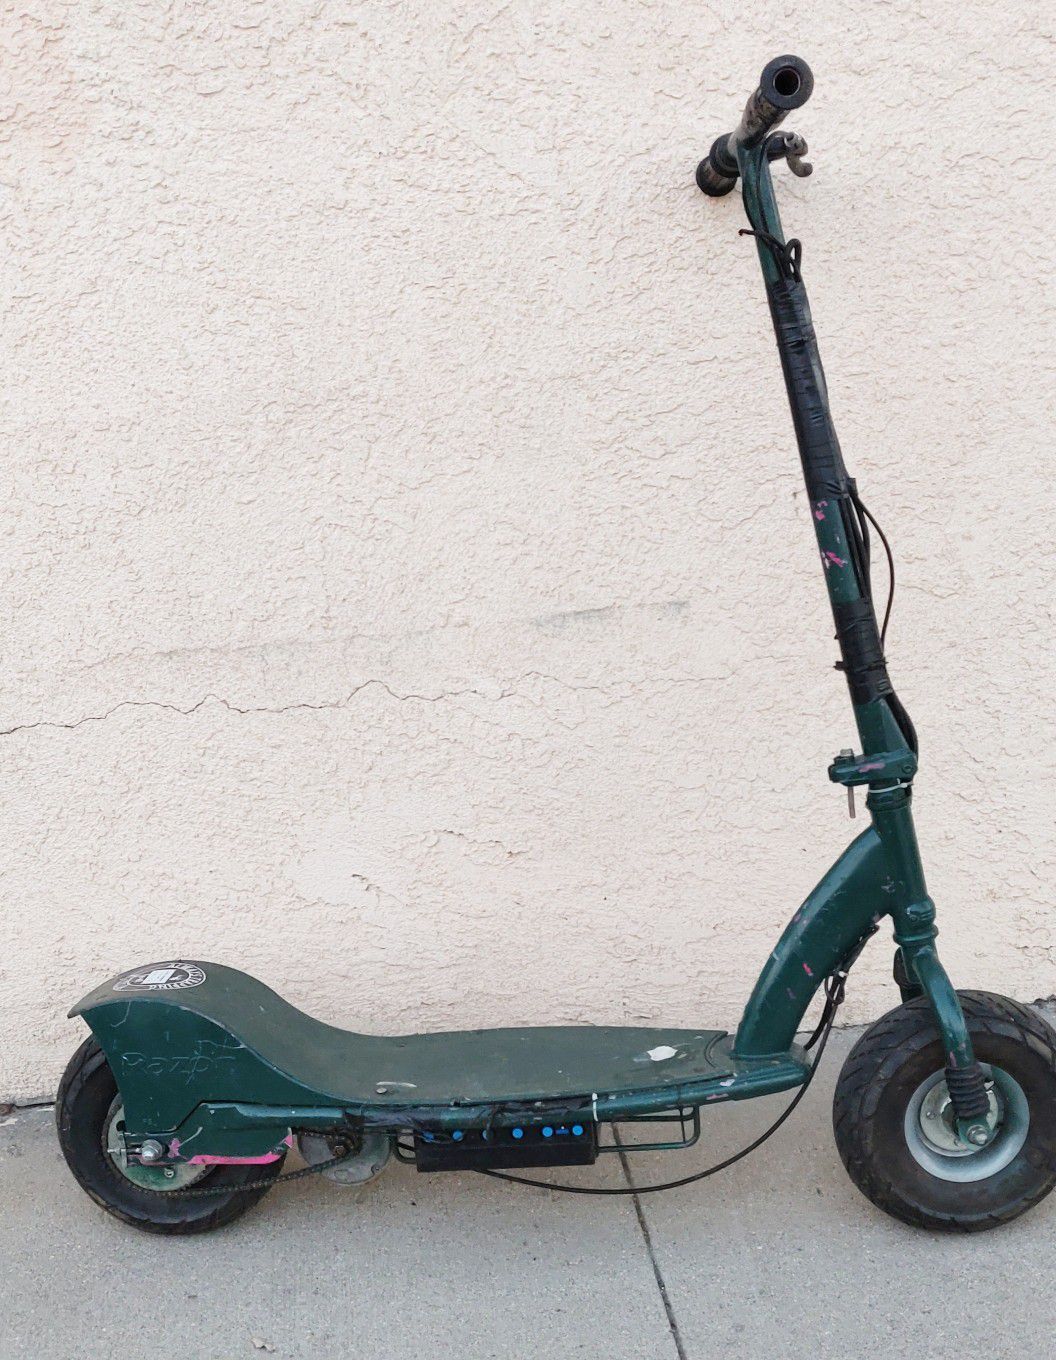 Electric scooter need work